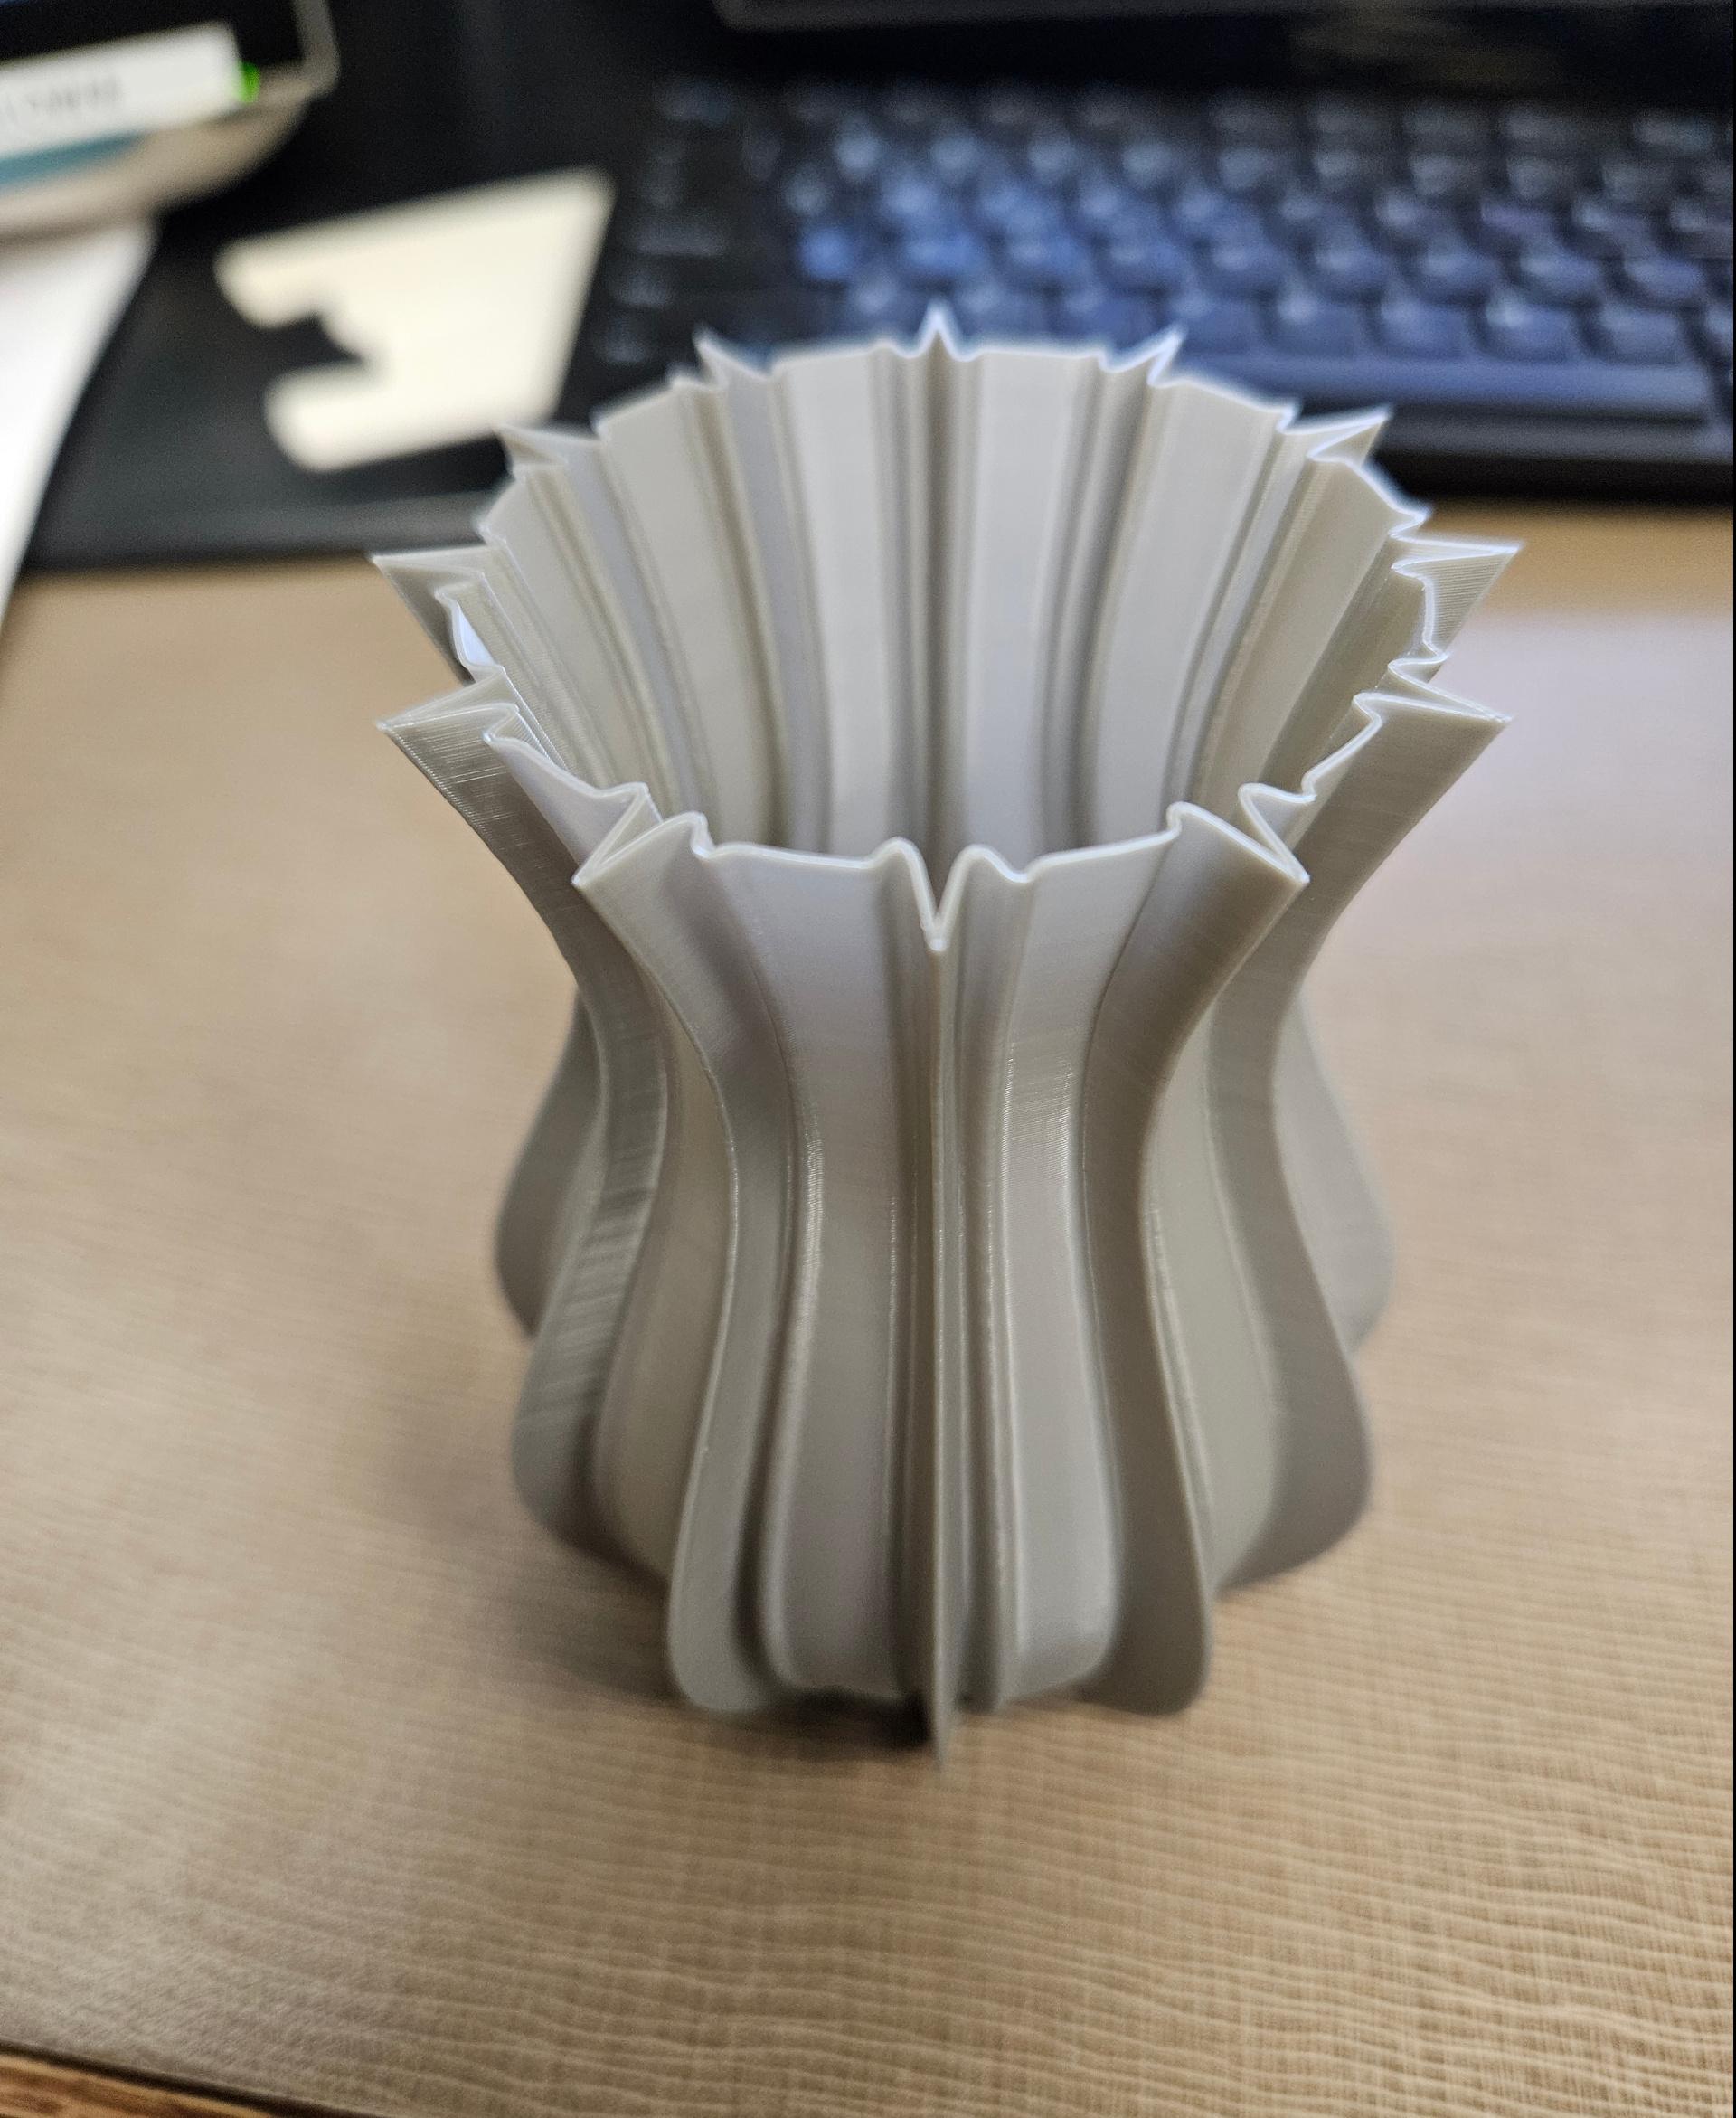 Seduction Vases - This amused me as an ECG tech. Printed very nicely. My coworkers love it. - 3d model